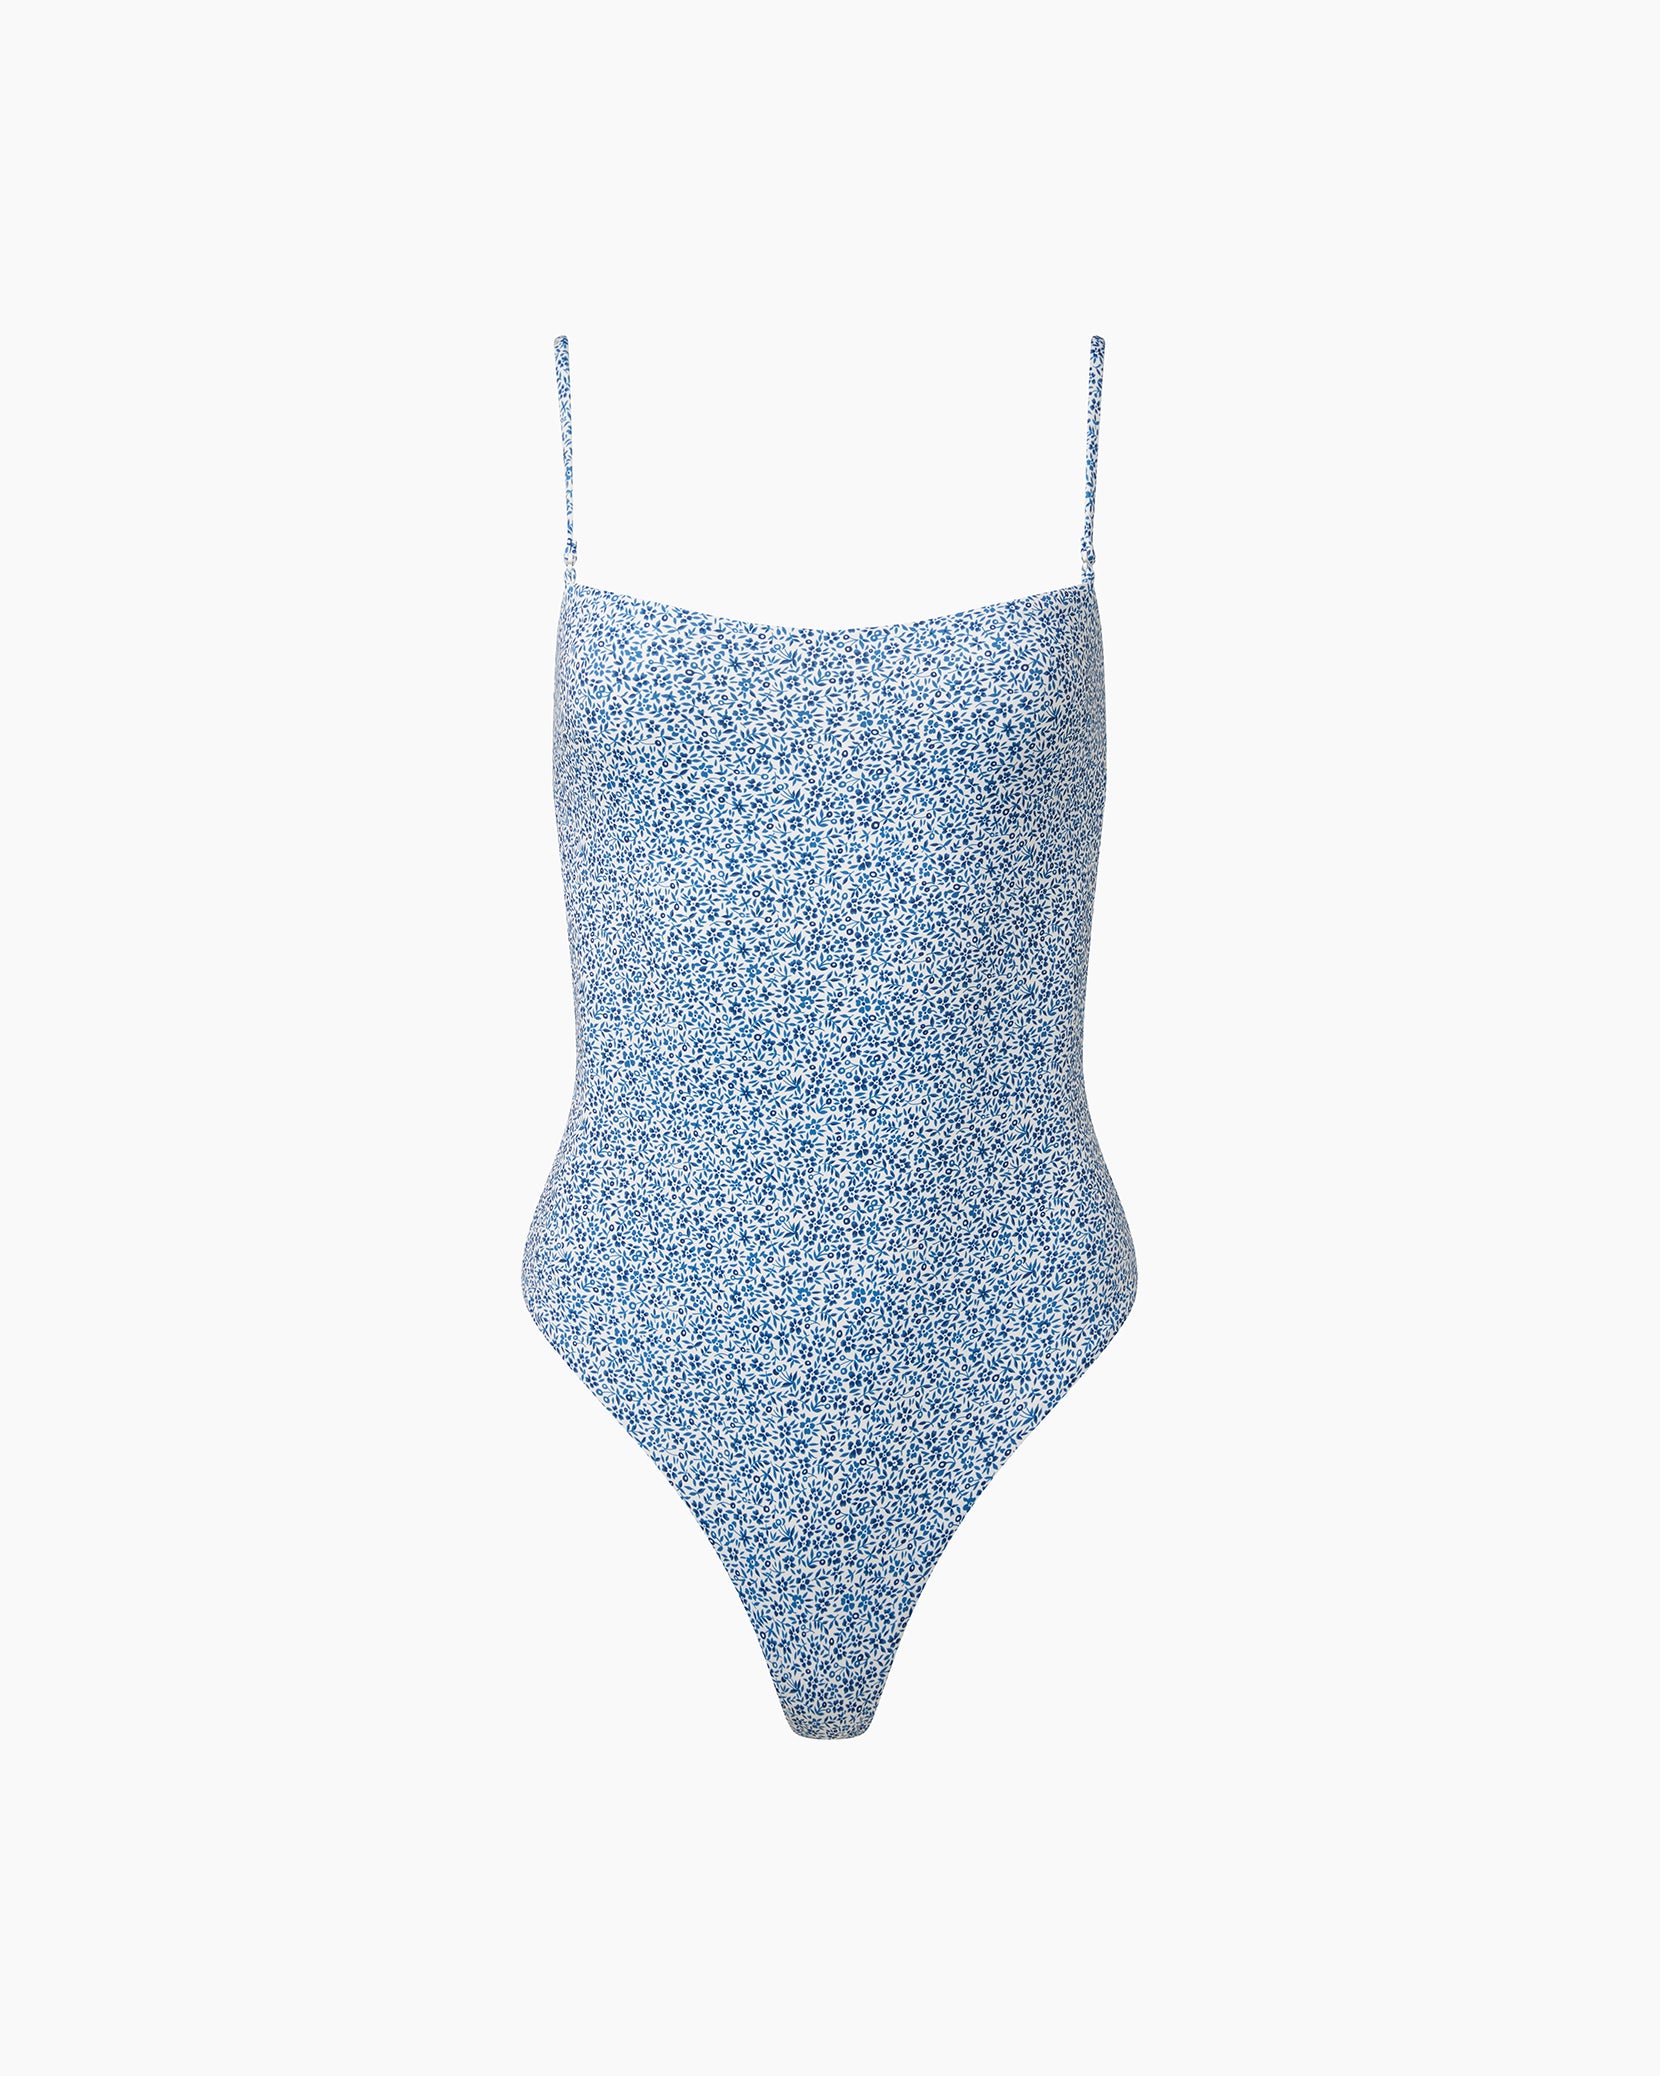 Buy Twist & Loop Swimsuit by DASH AND DOT at Ogaan Market Online Shopping  Site